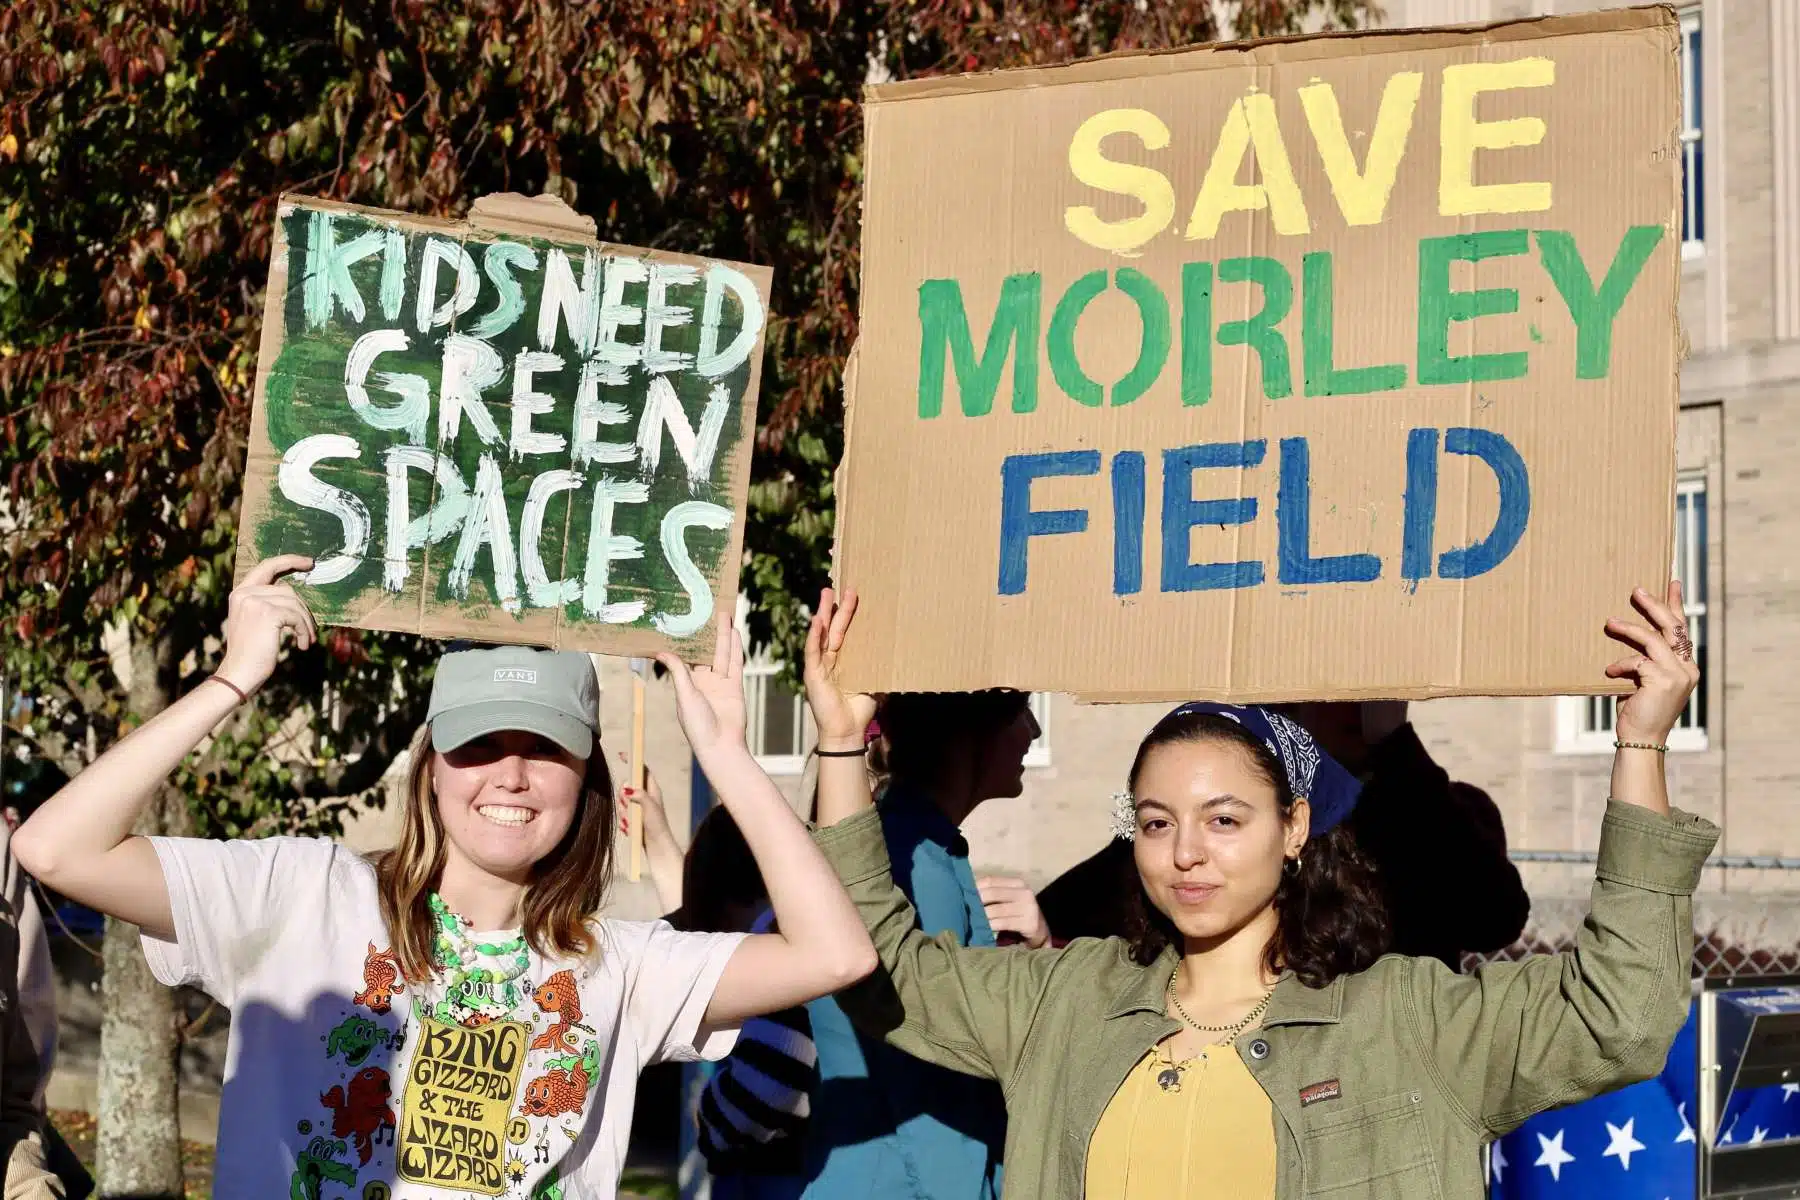 Rally to save Pawtucket’s Morley Field as city ignores residents’ pleas